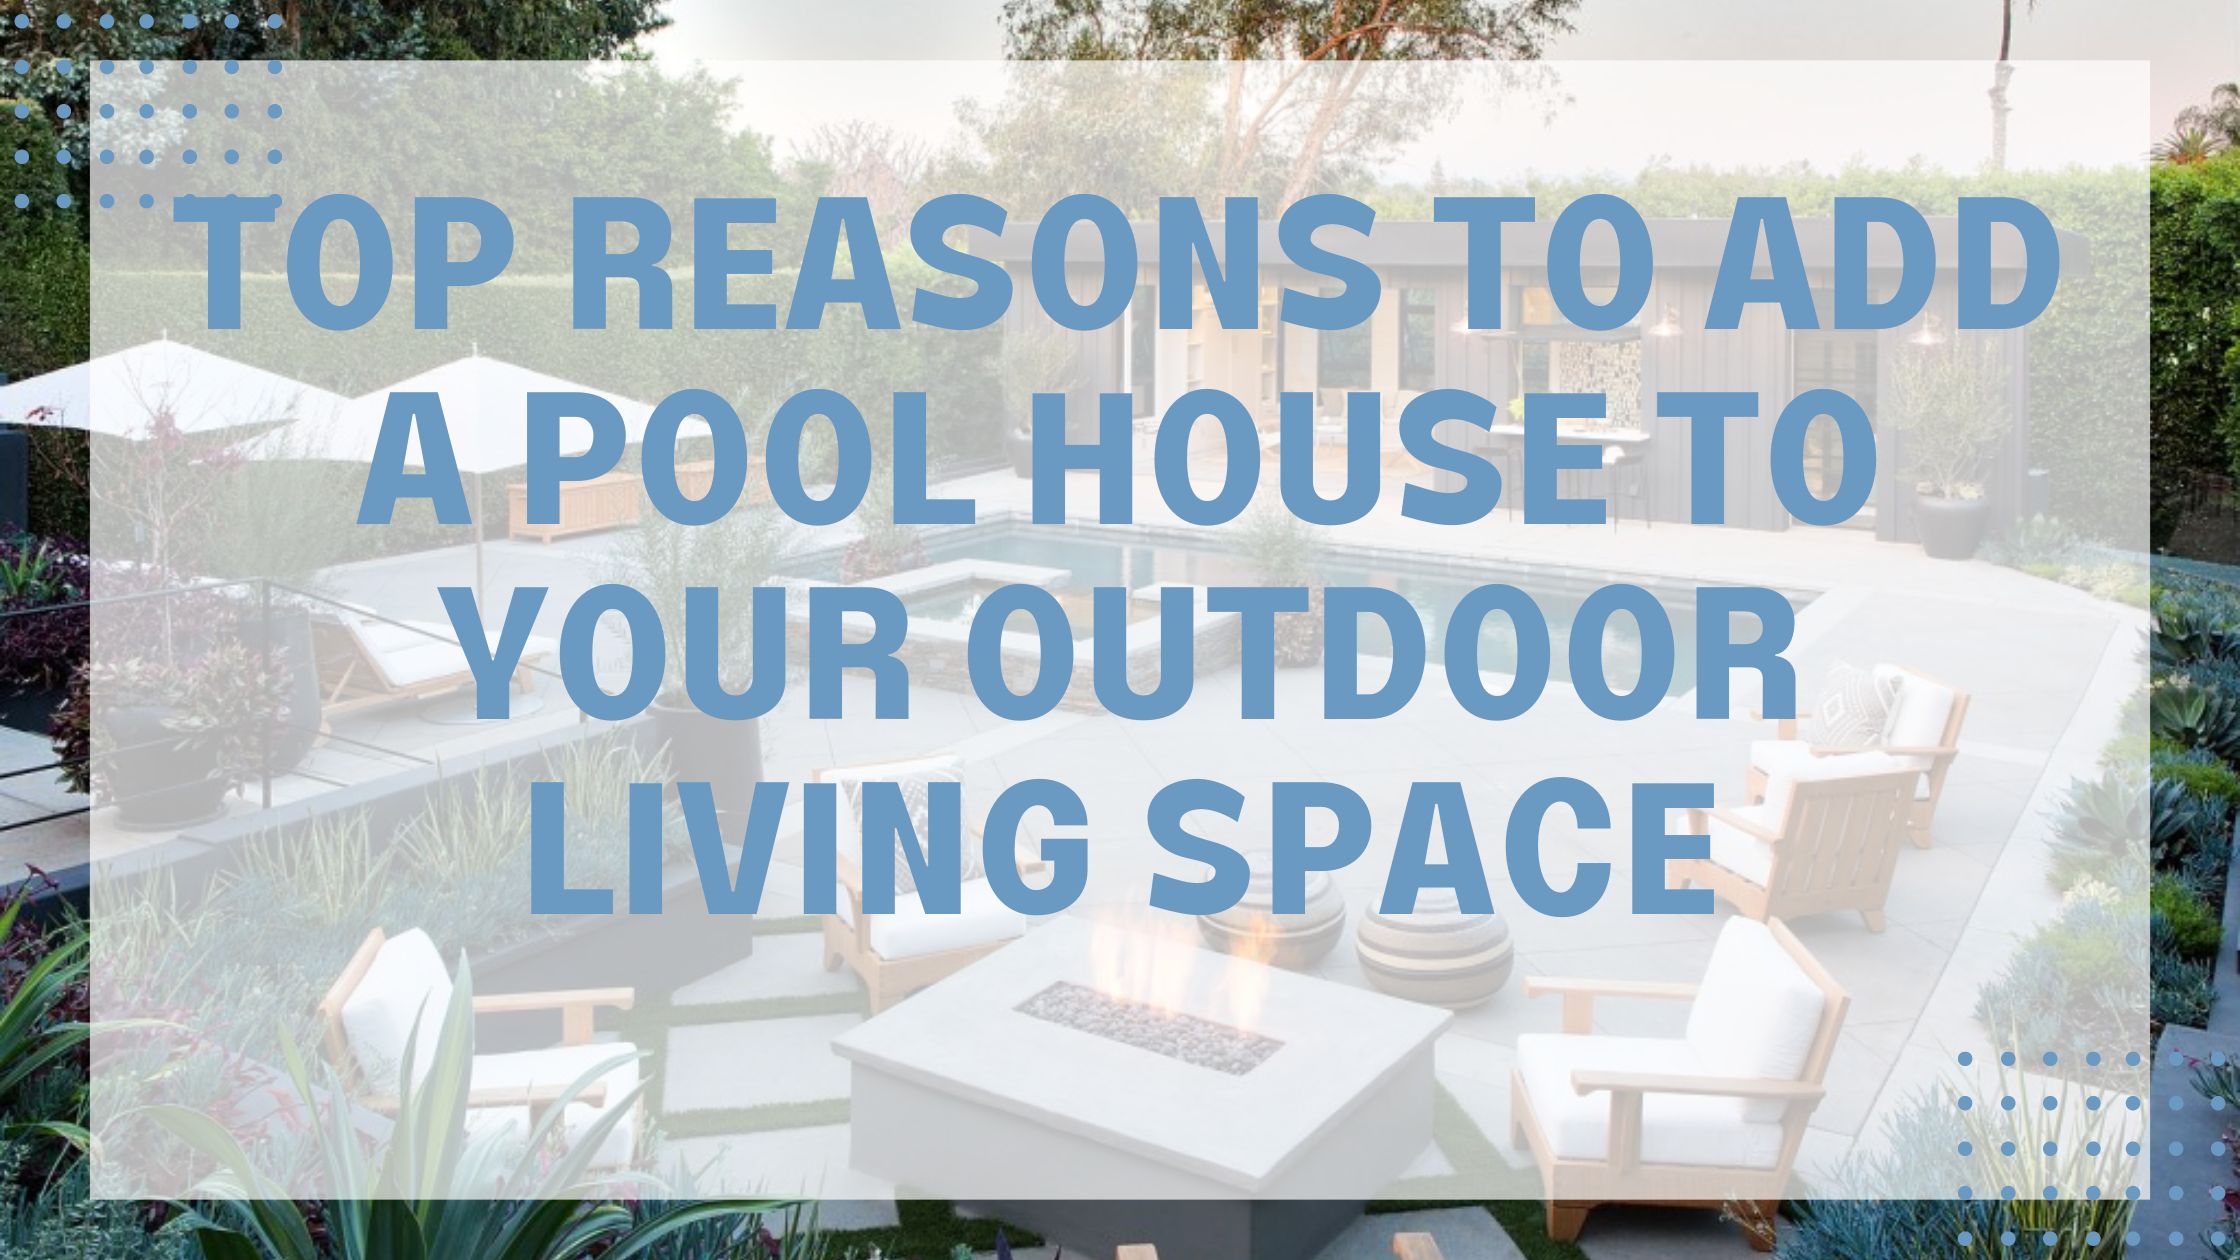 Top Reasons to Add a Pool House to Your Outdoor Living Space